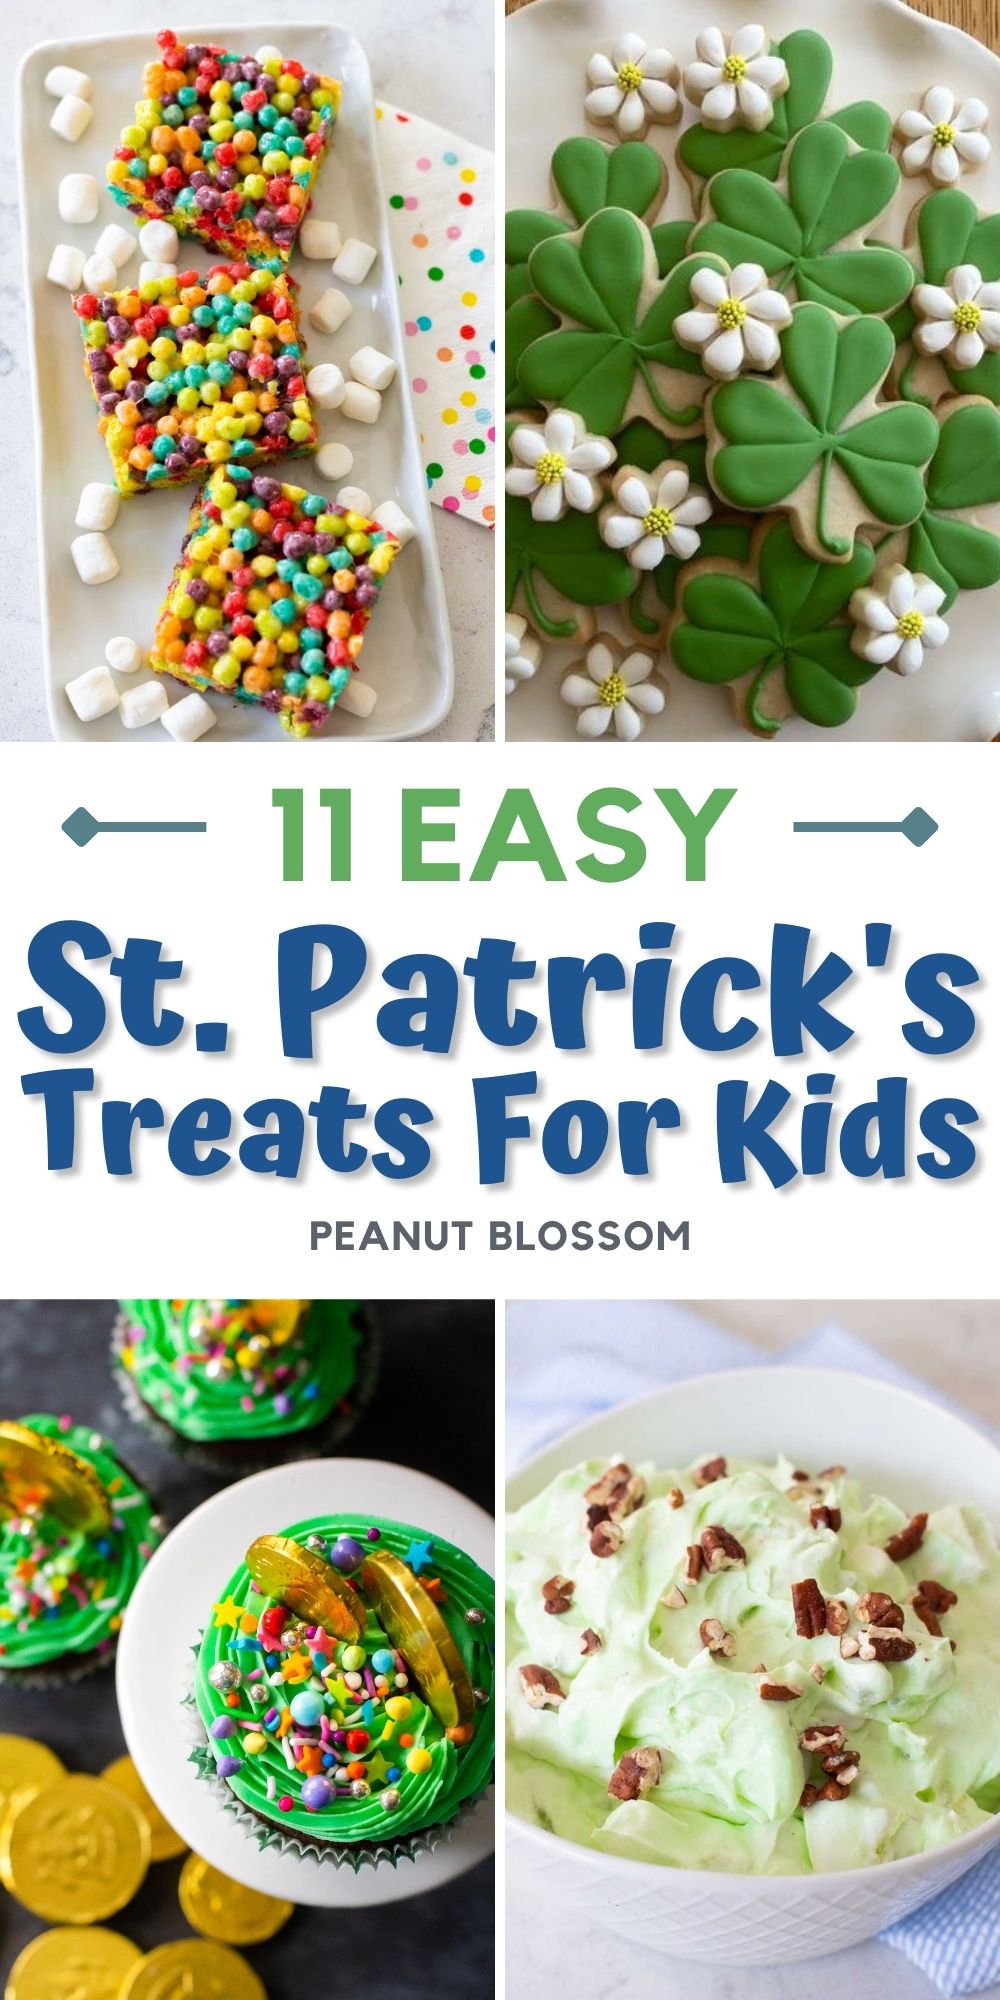 A photo collage shows 4 easy St. Patrick's Day desserts for kids to bake.